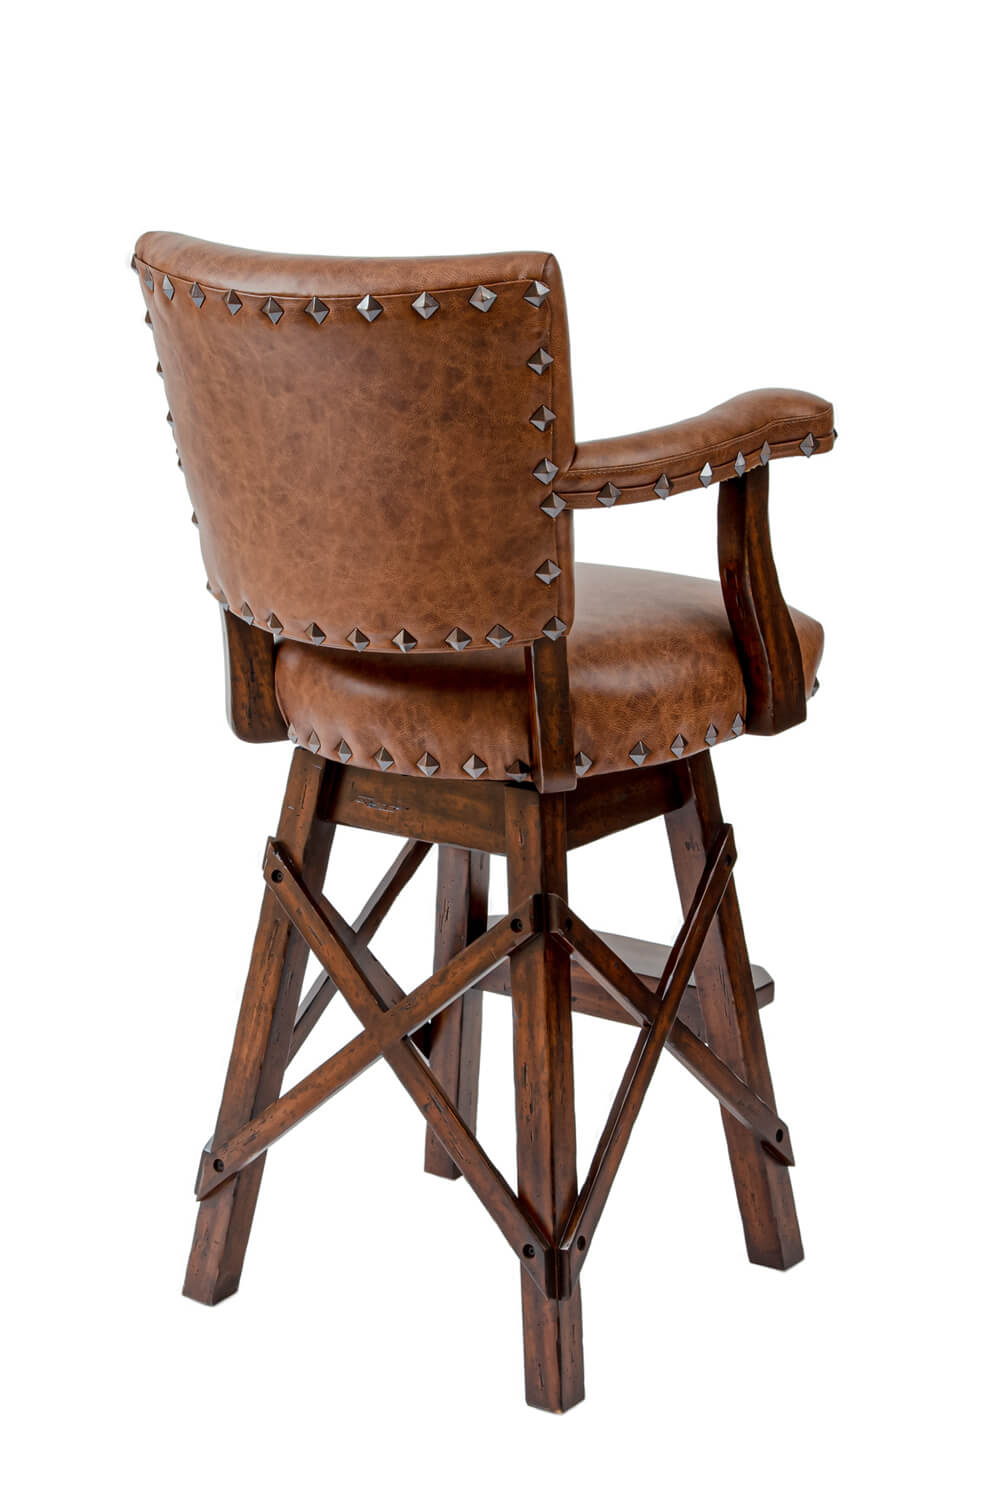 El Dorado Rustic Wood Swivel Stool, Brown Leather Bar Stools With Arms